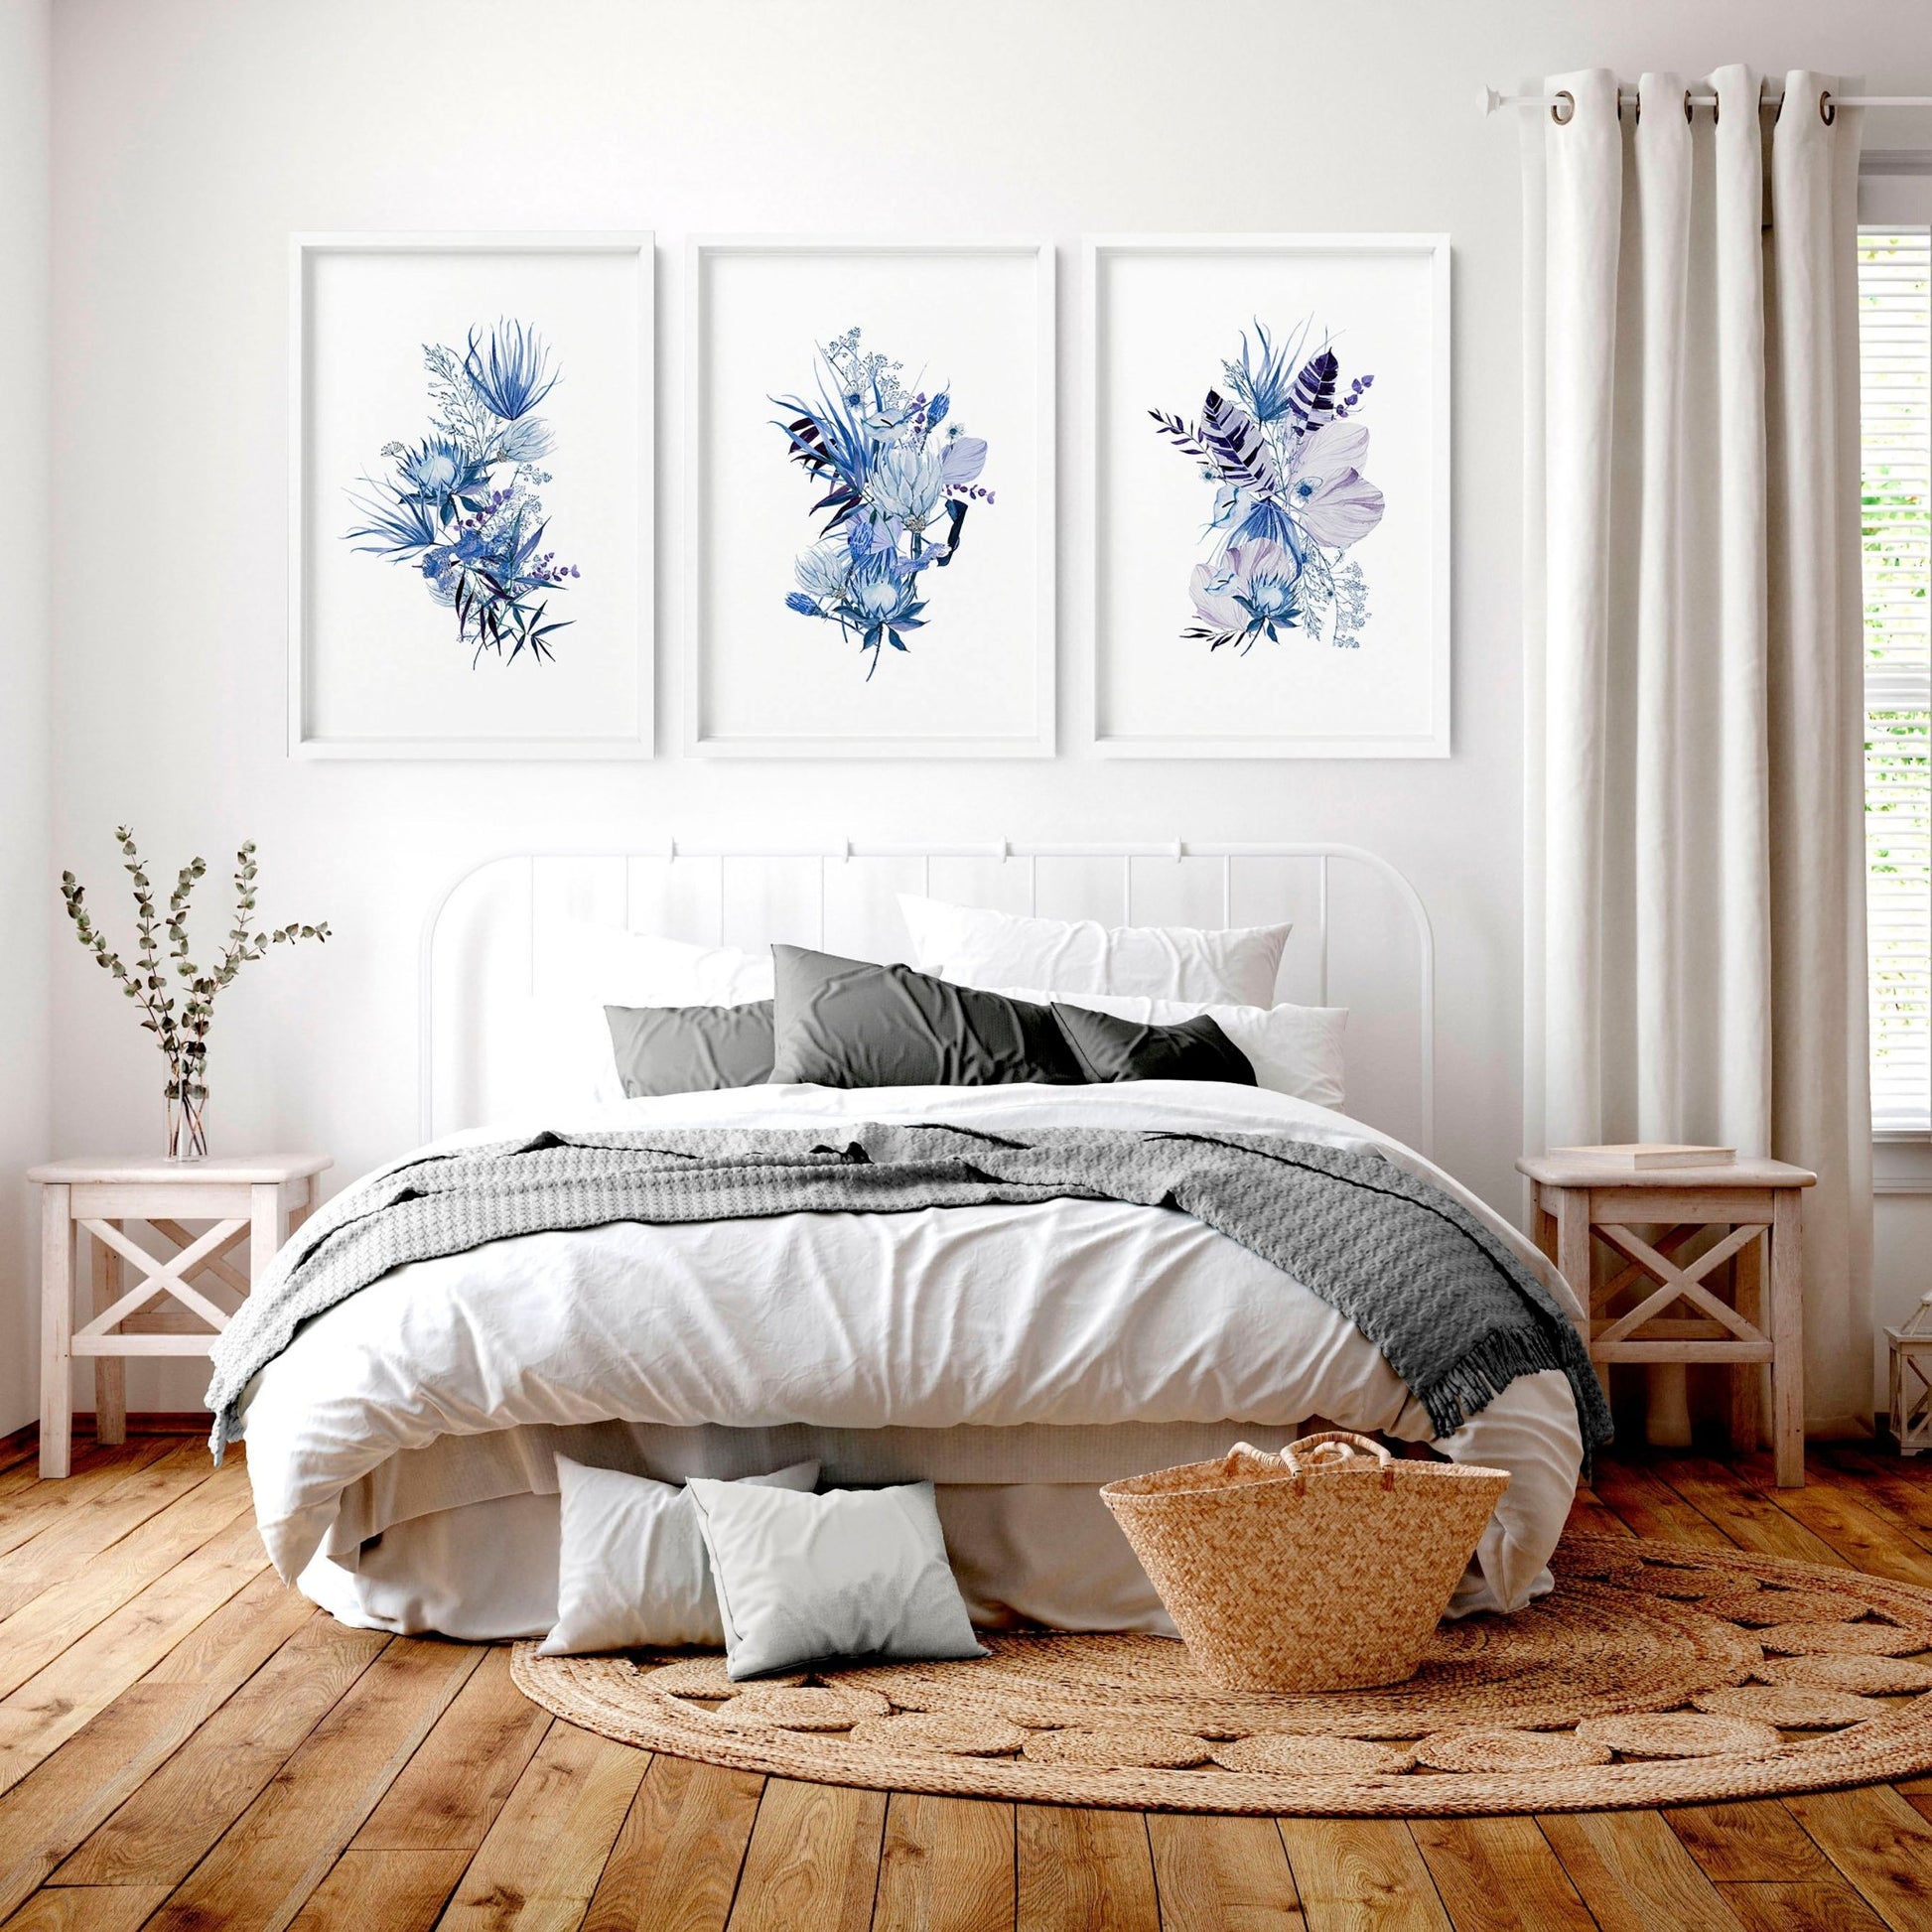 Country bedroom wall decor | set of 3 wall art prints - About Wall Art